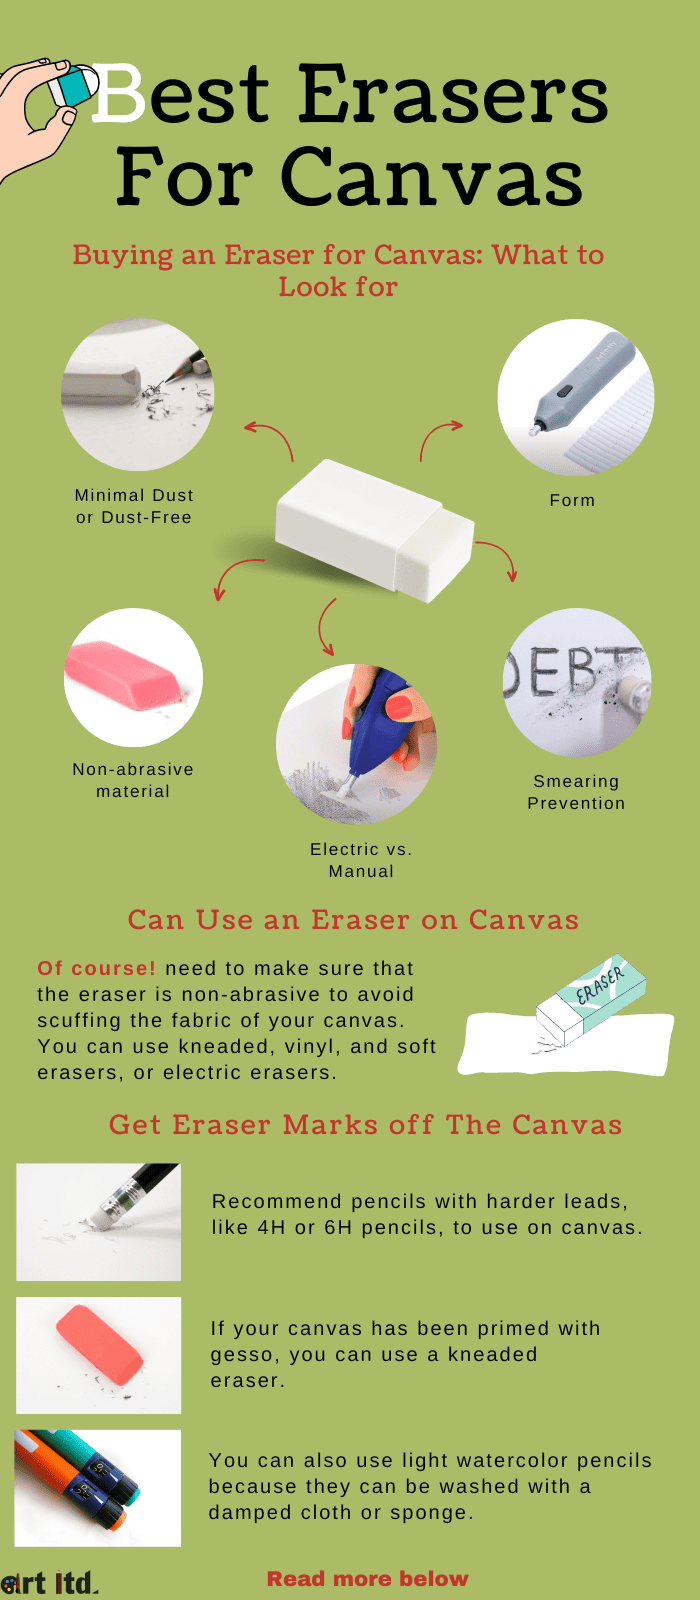 eraser-be-used-on-canvas